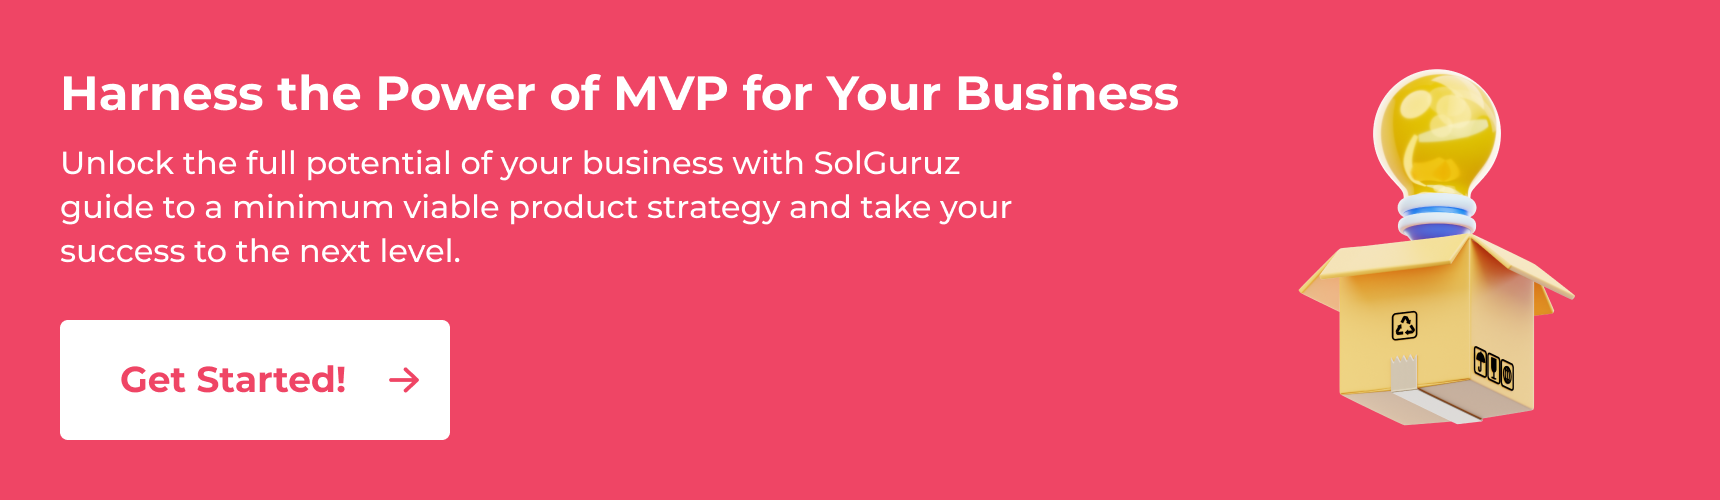 Harness the Power of MVP Development for Your Business